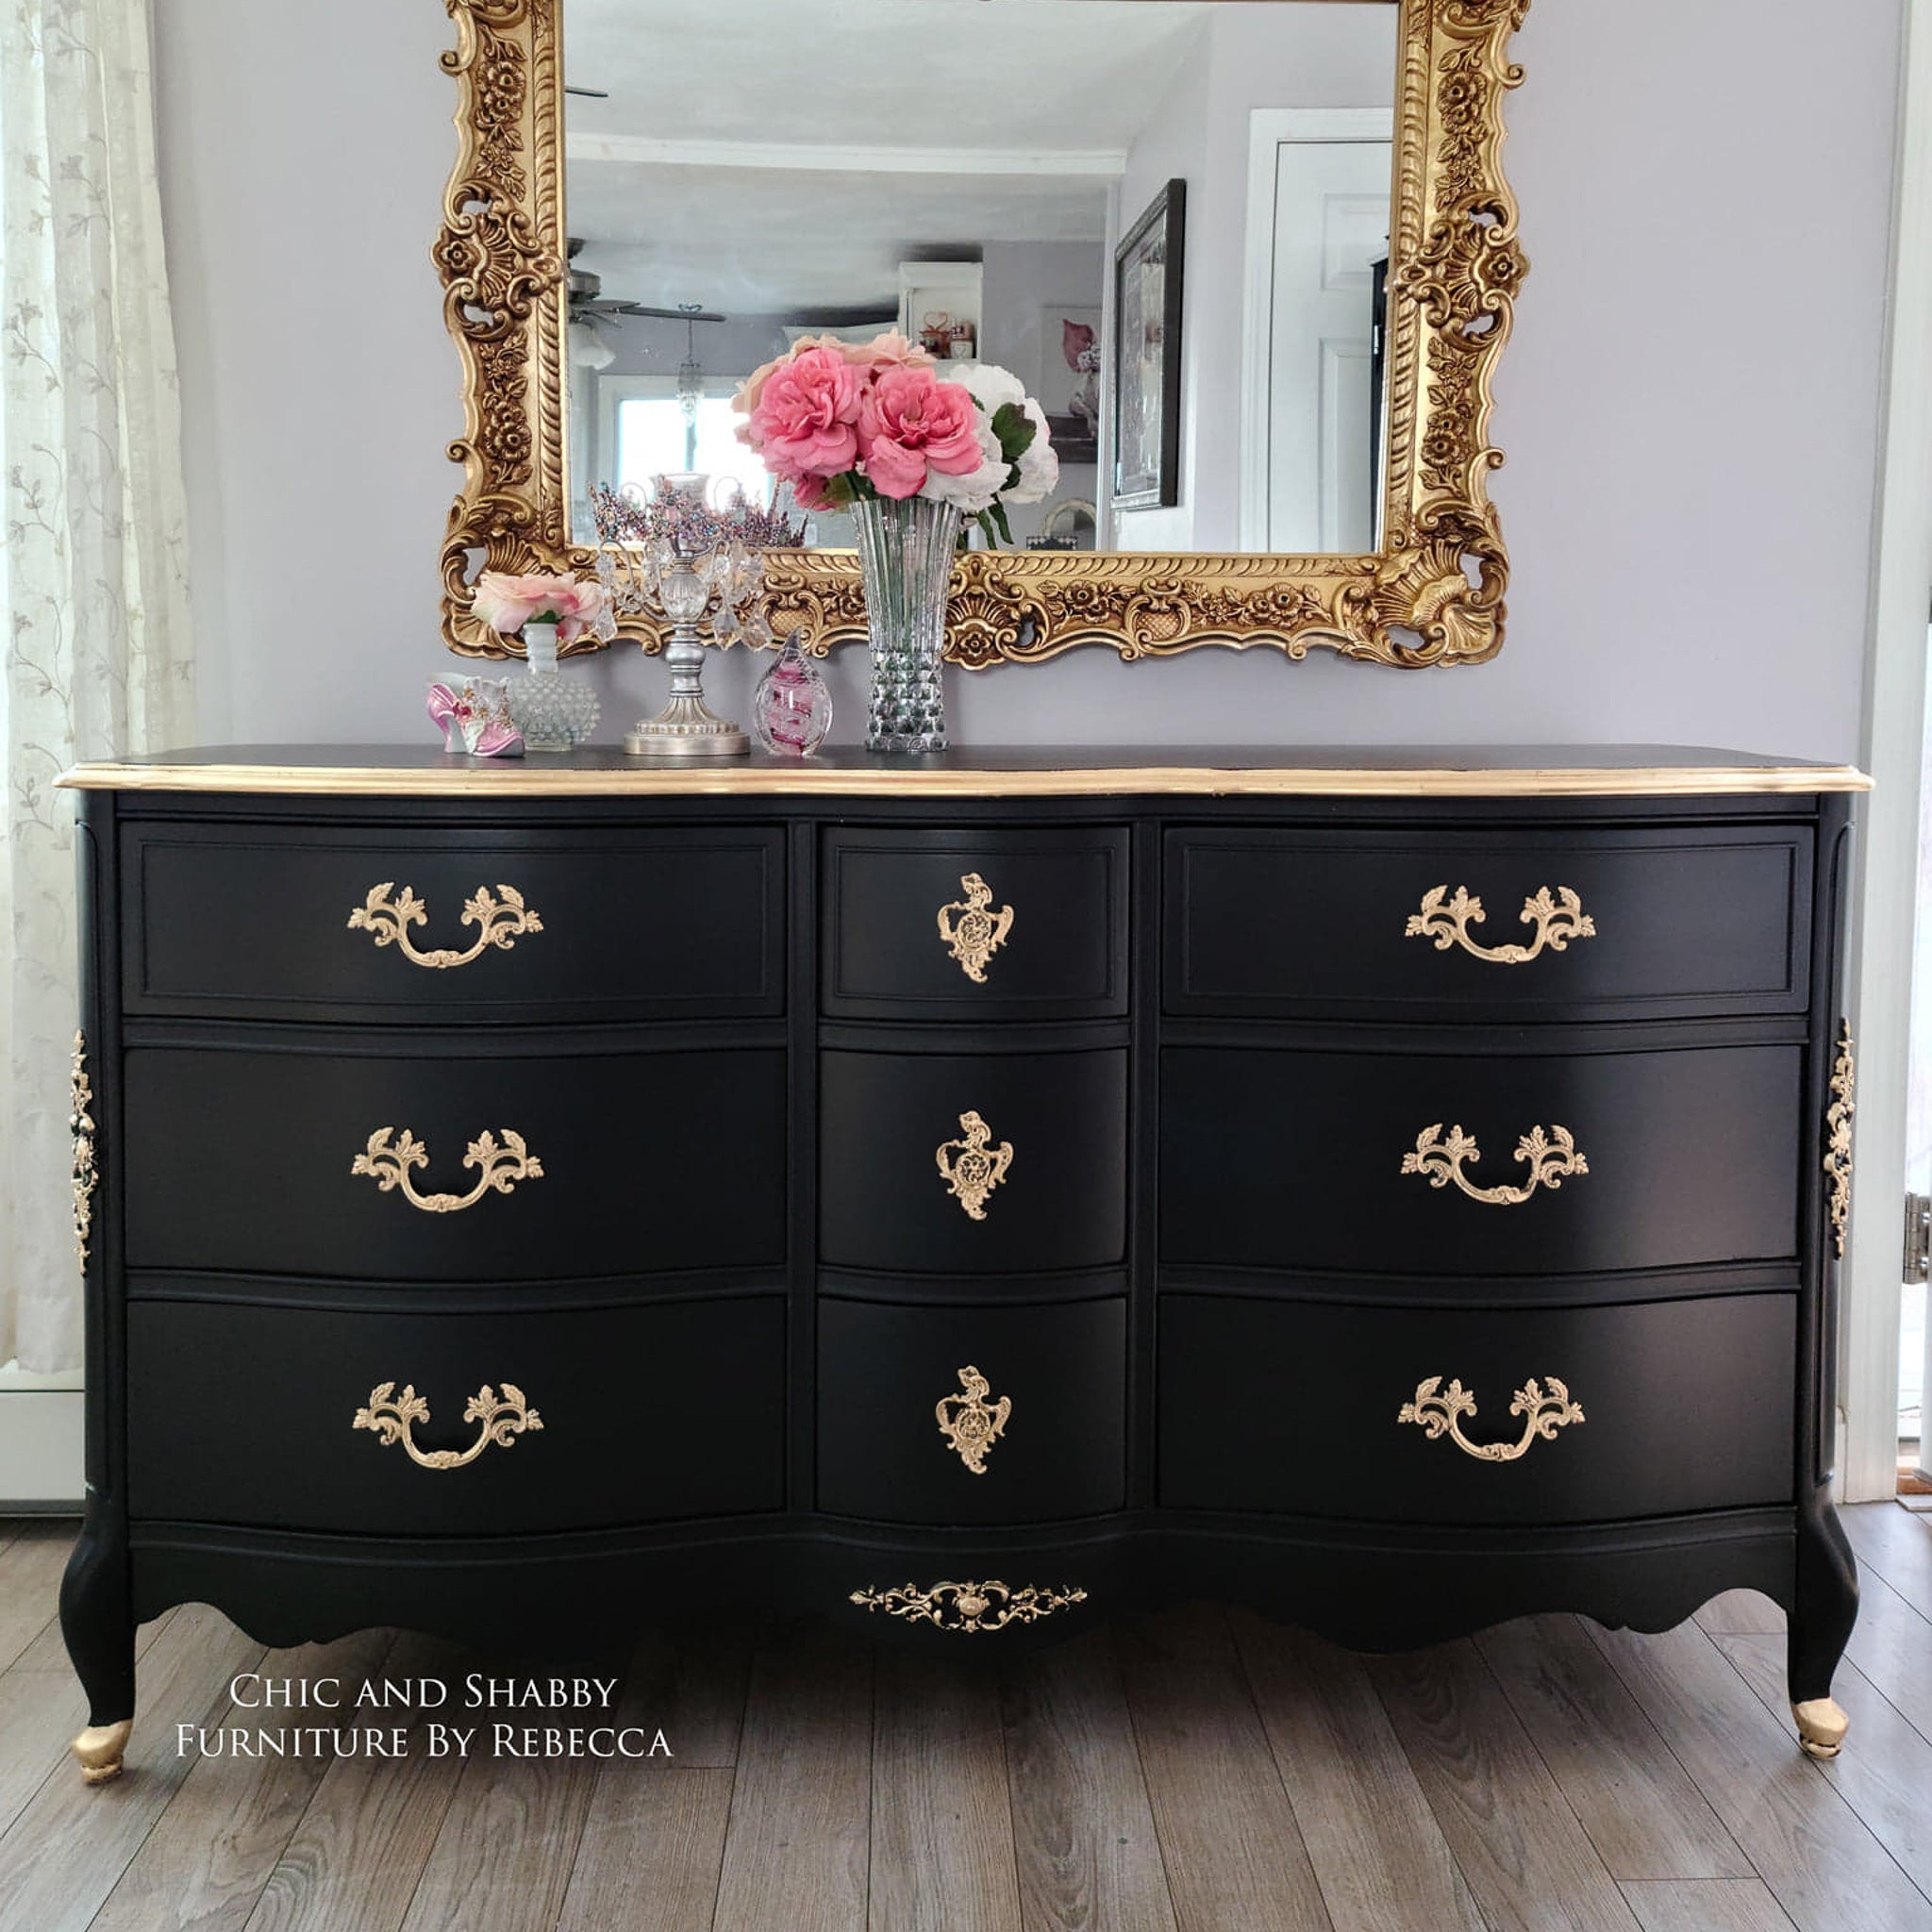 A vintage 9-drawer dresser refurbished by Chic and Shabby Furniture by Rebecca is painted in Dixie Belle's Cavier chalk mineral paint and has gold accents.